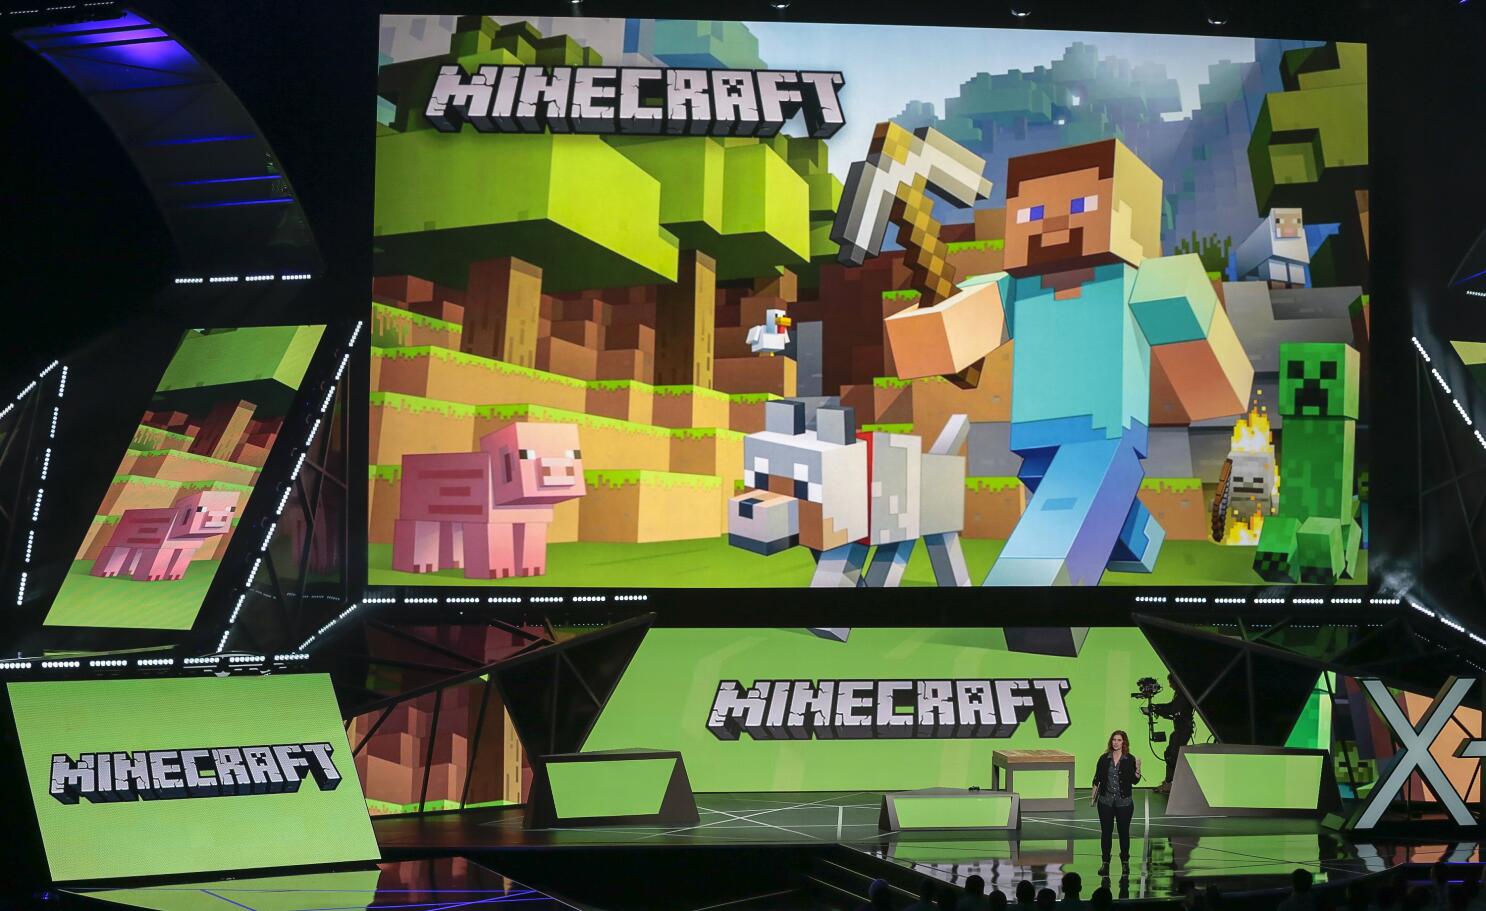 Minecraft's launch page pays tribute to Technoblade - Polygon